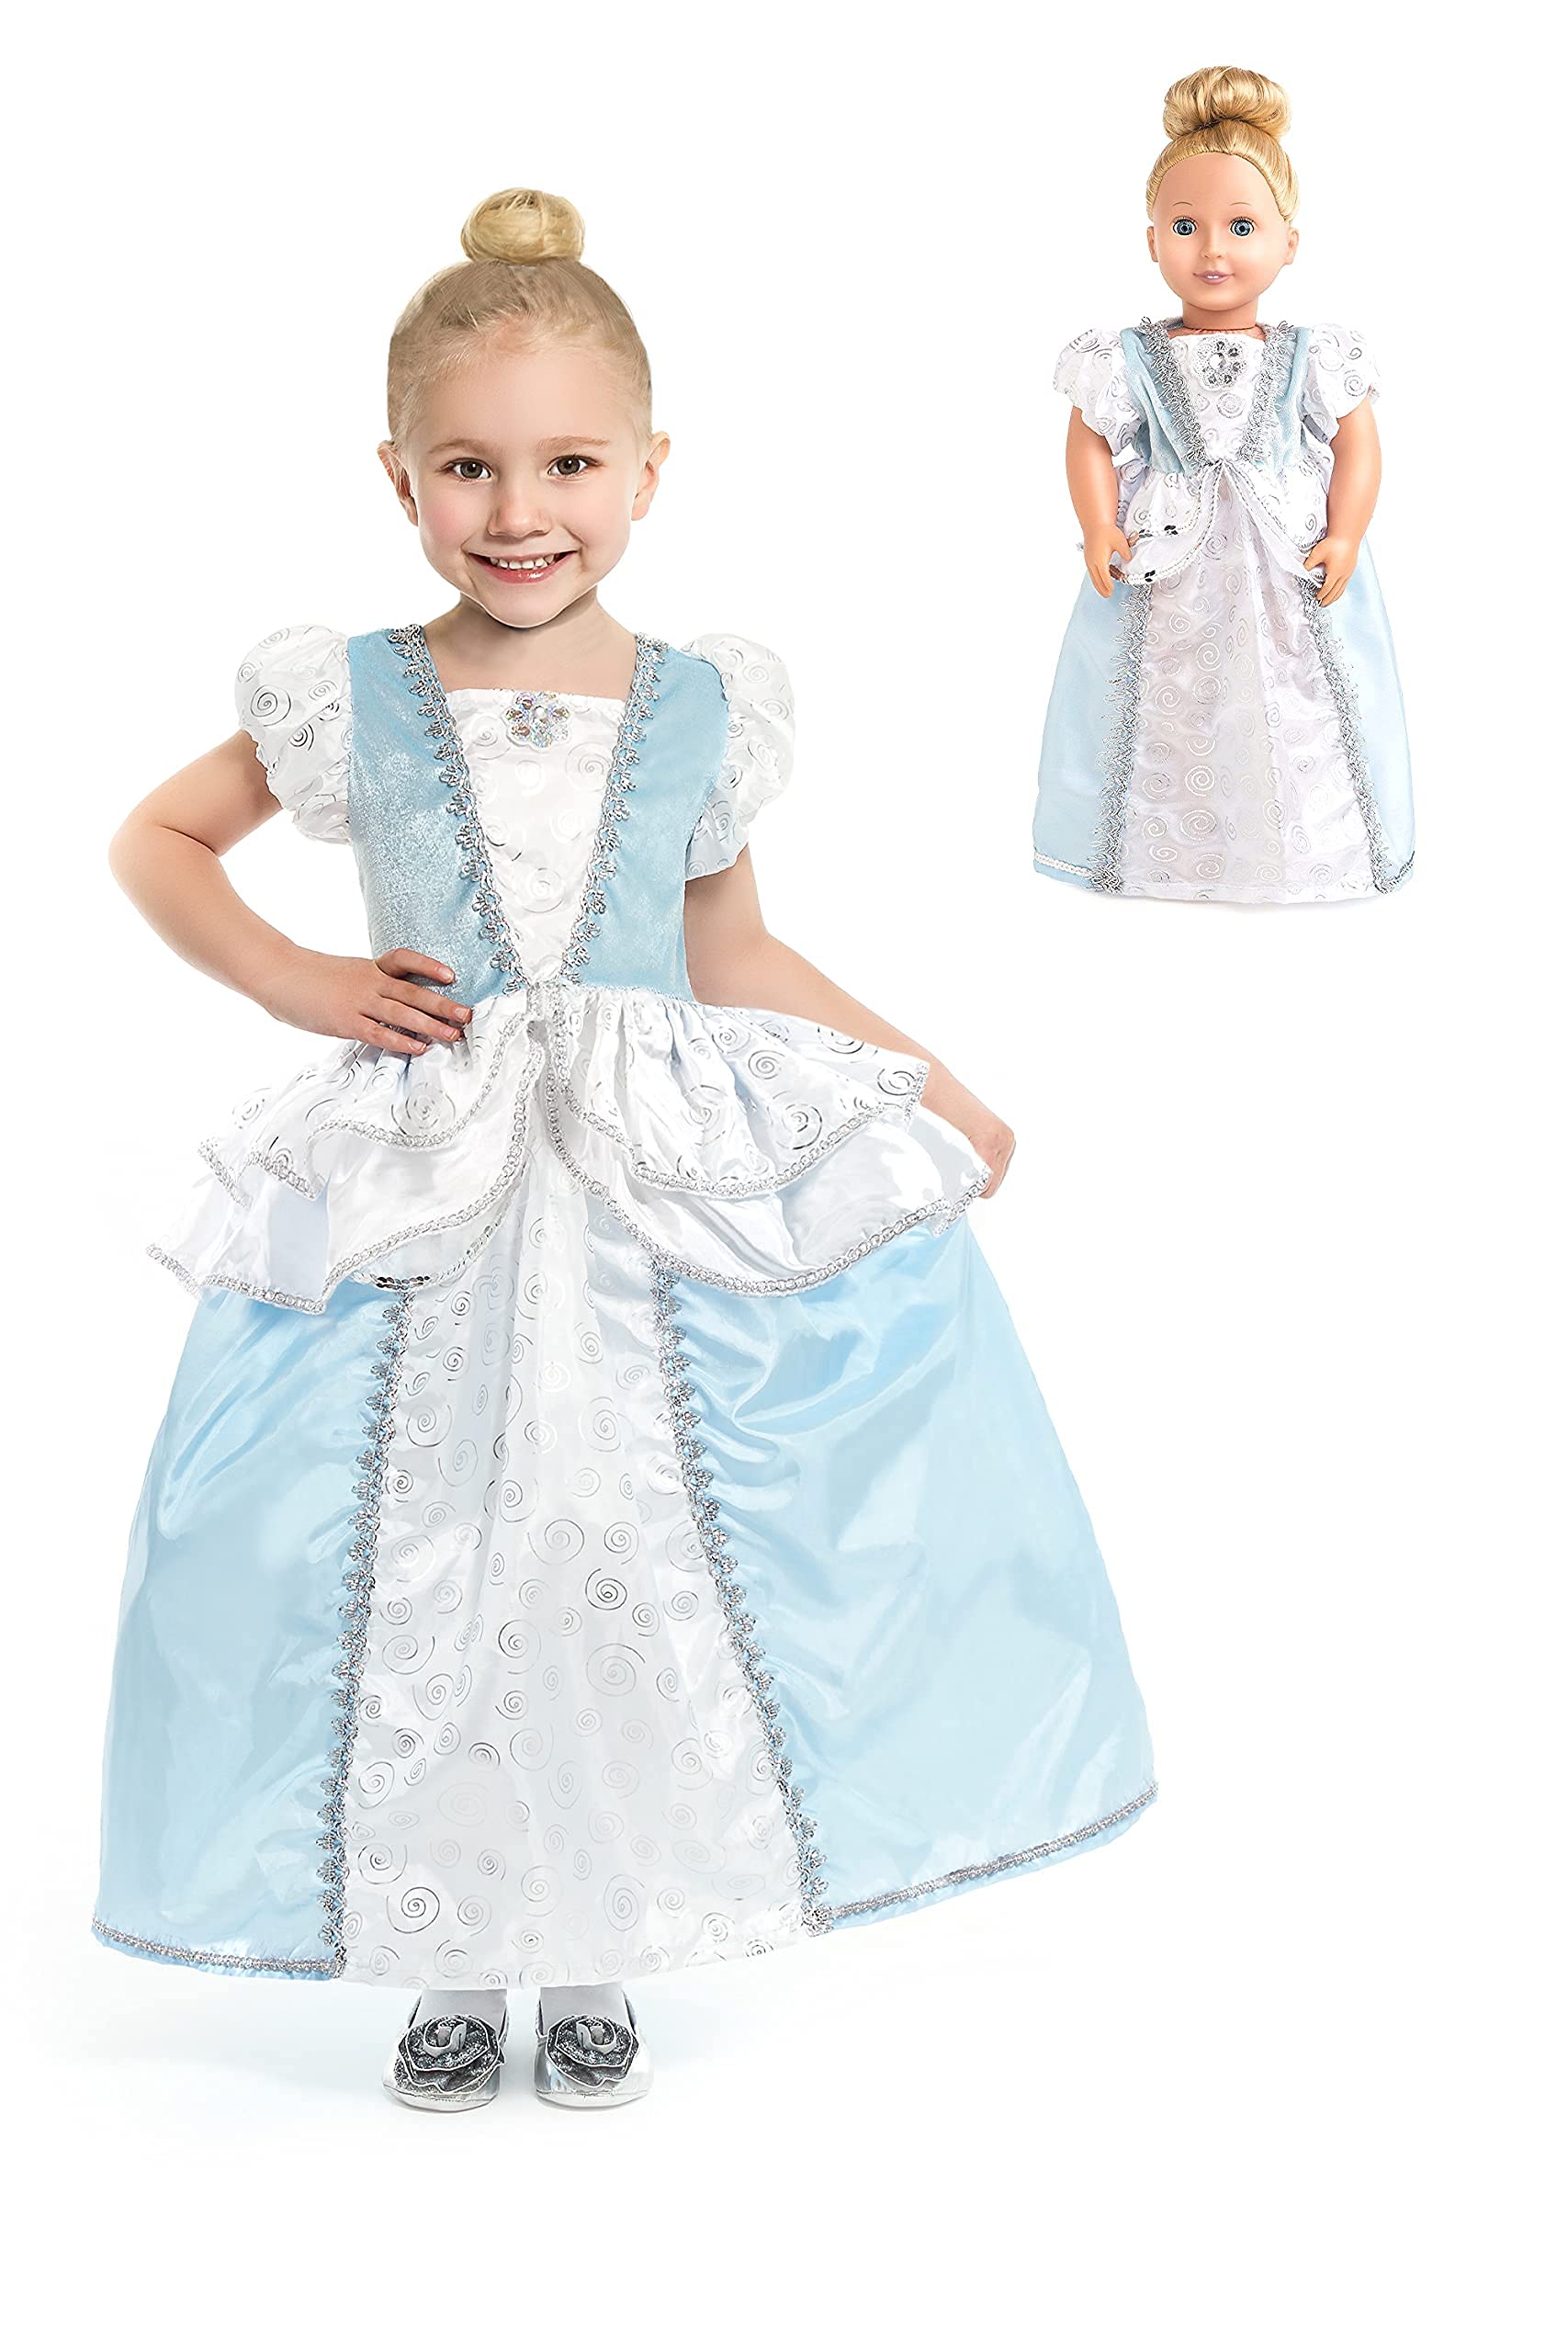 Little Adventures Cinderella Princess Dress Up Costume (Large Age 5-7) with Matching Doll Dress - Machine Washable Child Pretend Play and Party Dress with No Glitter